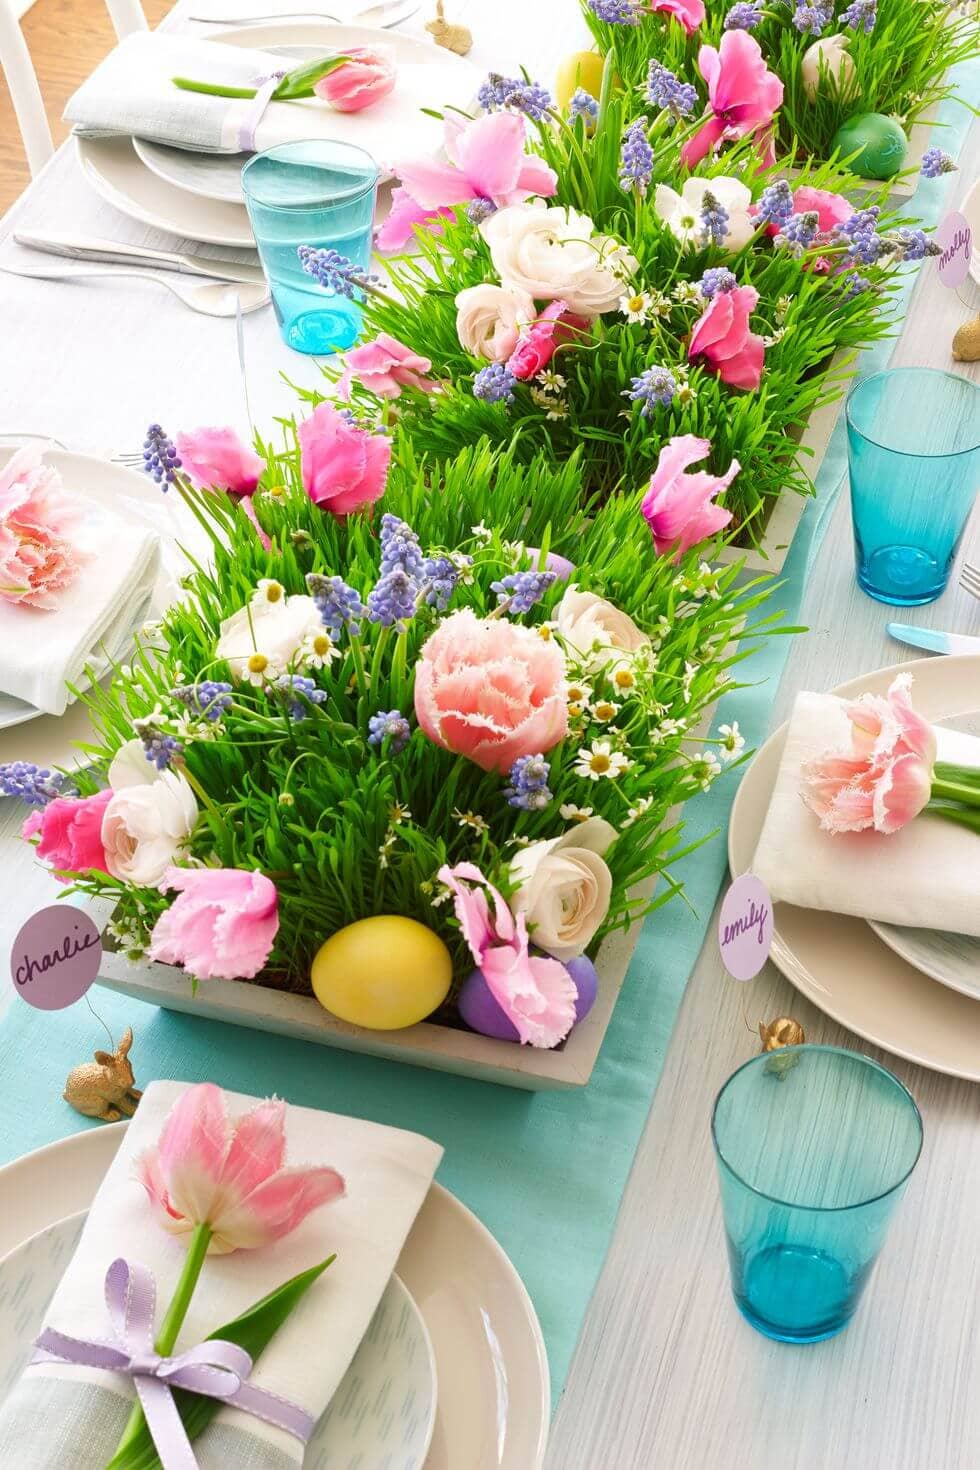 How do you tastefully decorate for Easter?